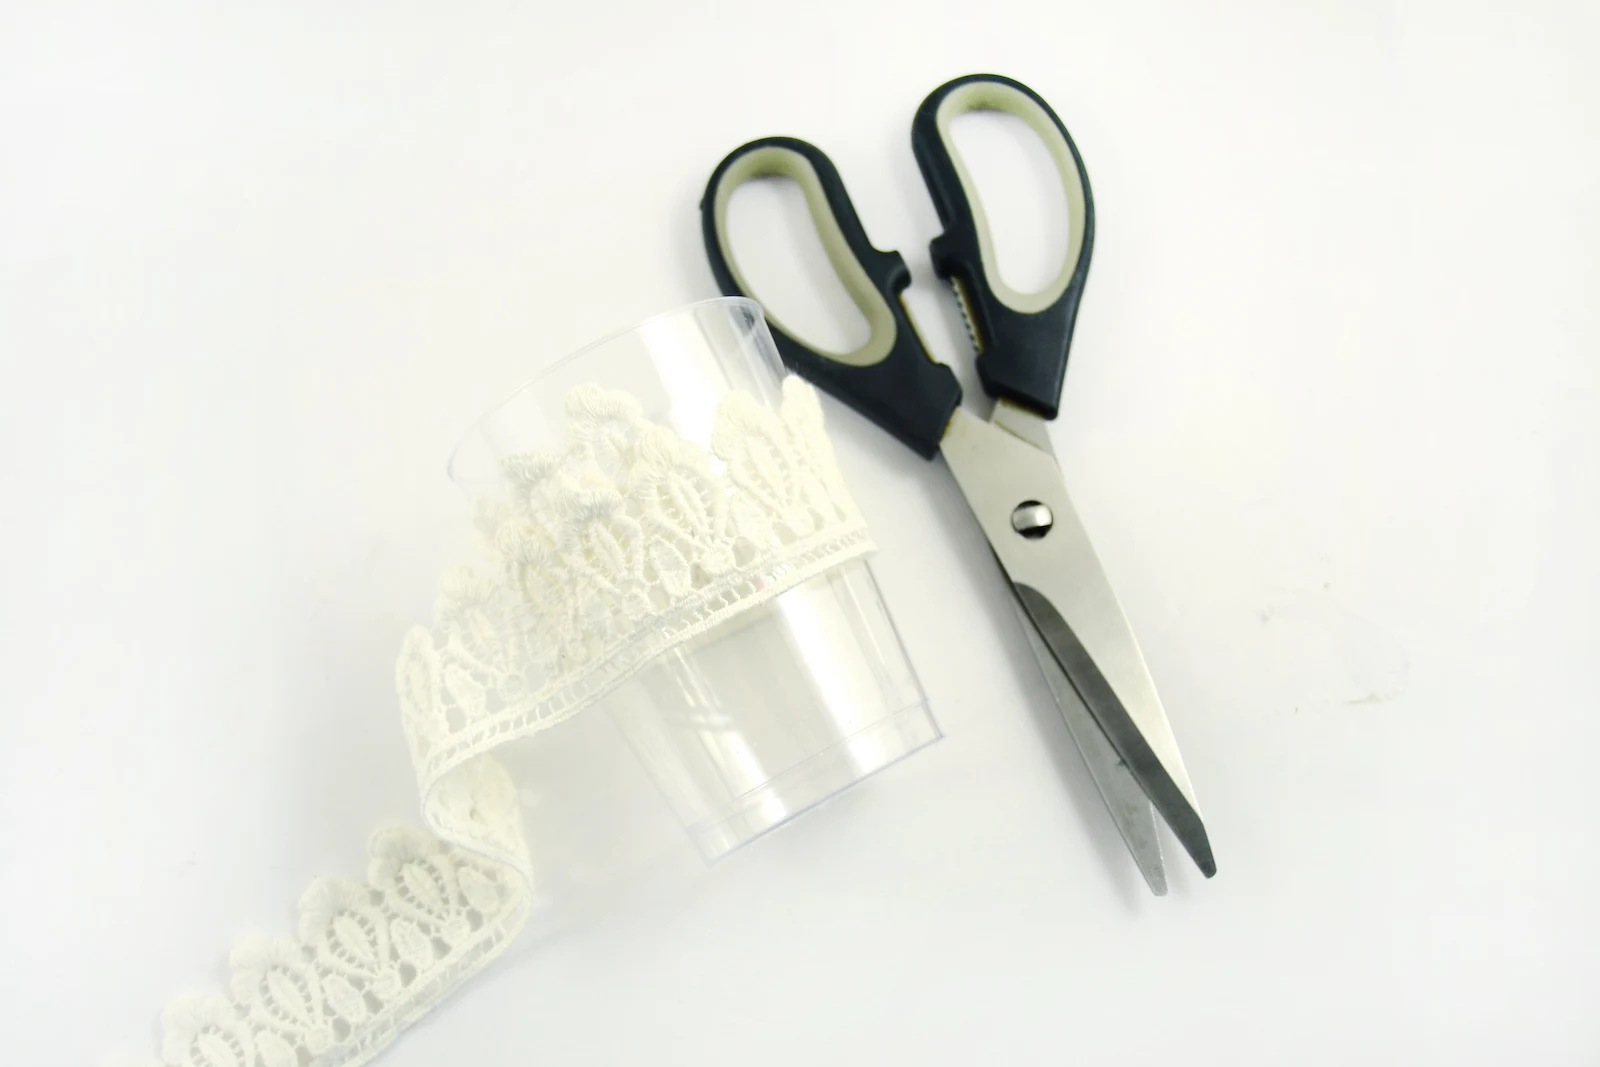 Pair of scissors and lace wrapped around a cup